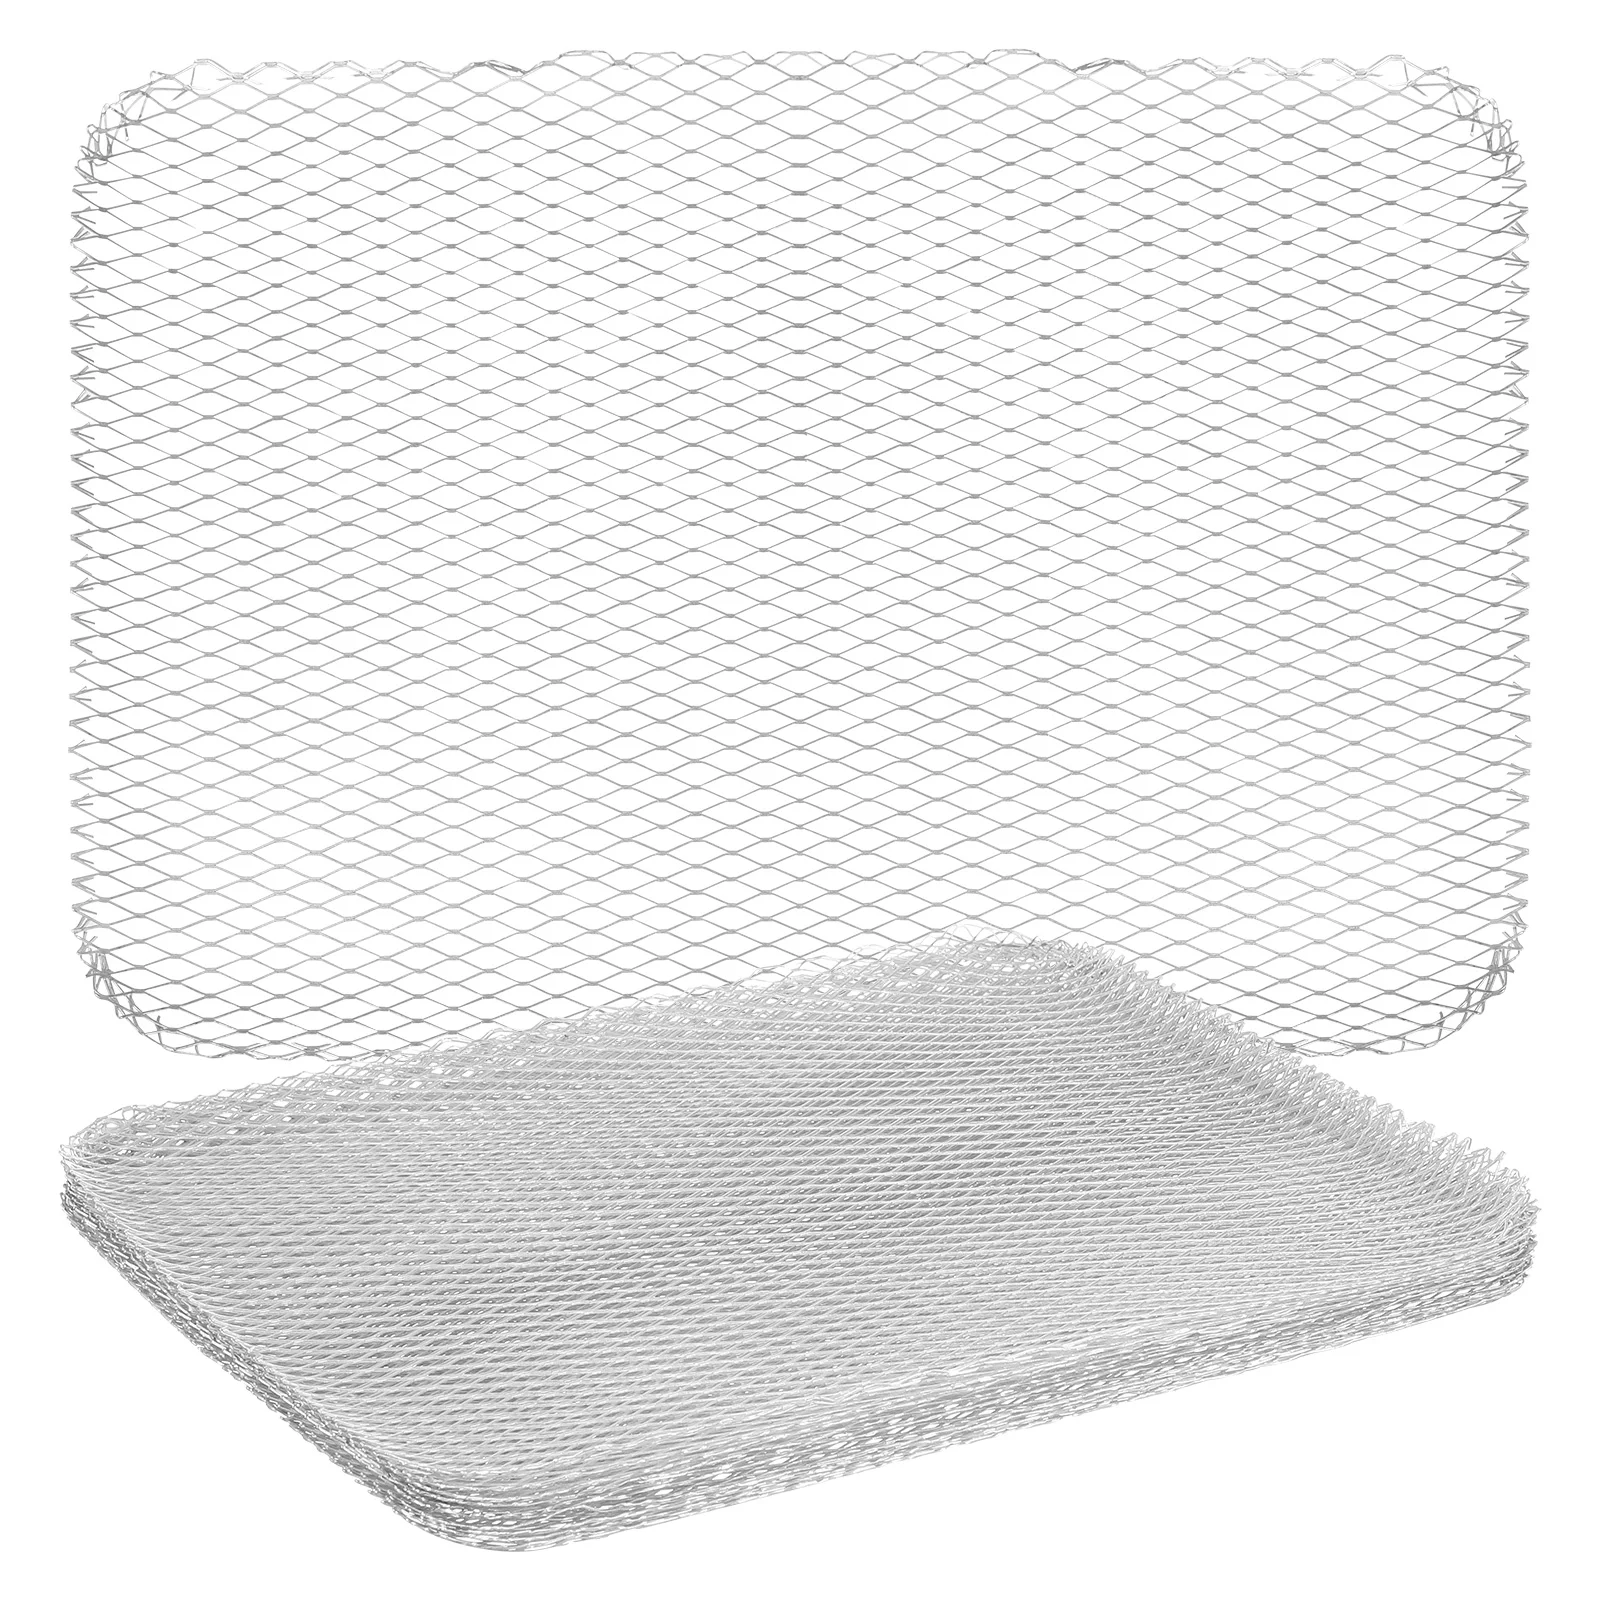 

Grill Mat Bbq Mesh Mats Barbecue Disposable Grilling Outdoor Topper Net Grate Baking Aluminum Cooking Rack Liners Cooling Stick